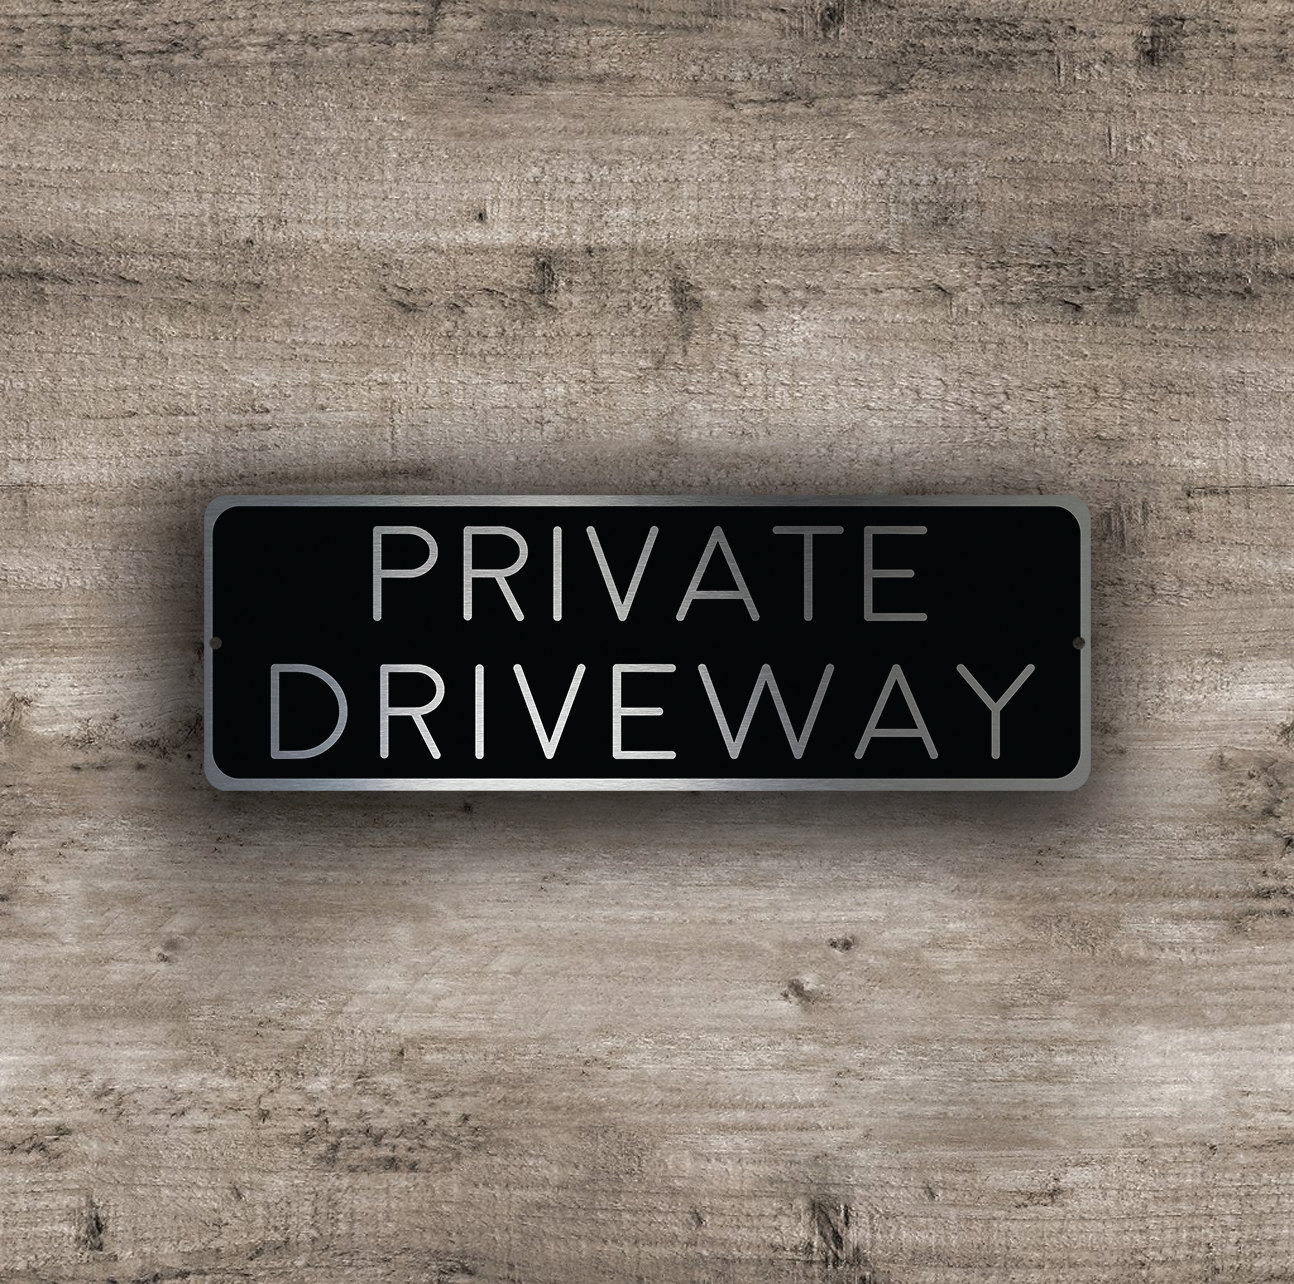 PRIVATE DRIVEWAY SIGN